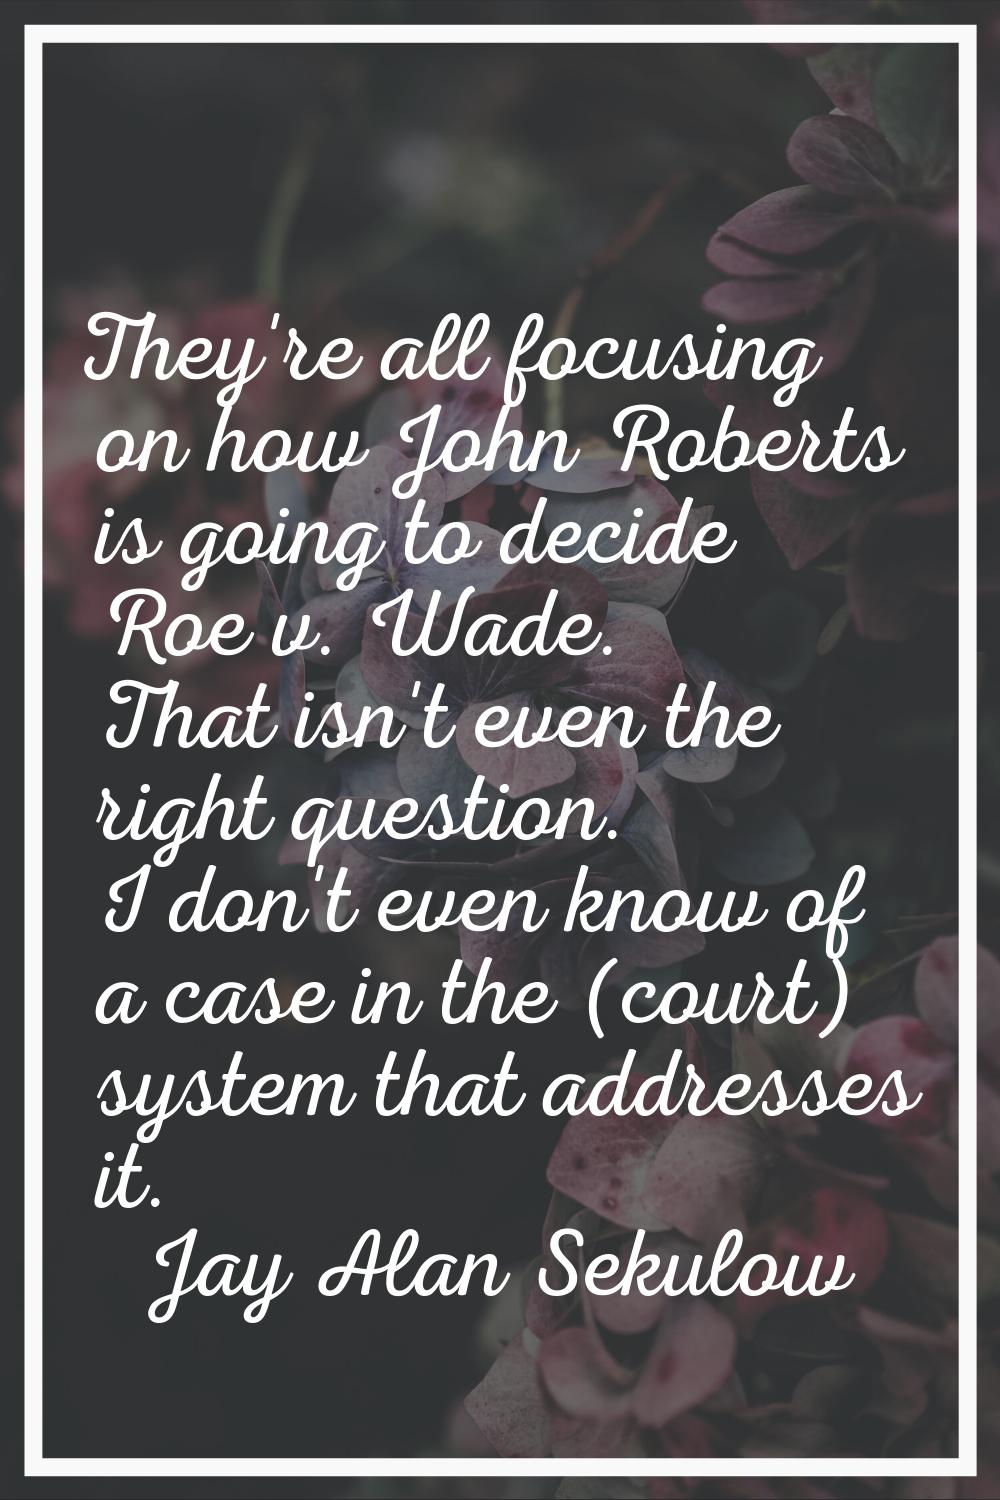 They're all focusing on how John Roberts is going to decide Roe v. Wade. That isn't even the right 